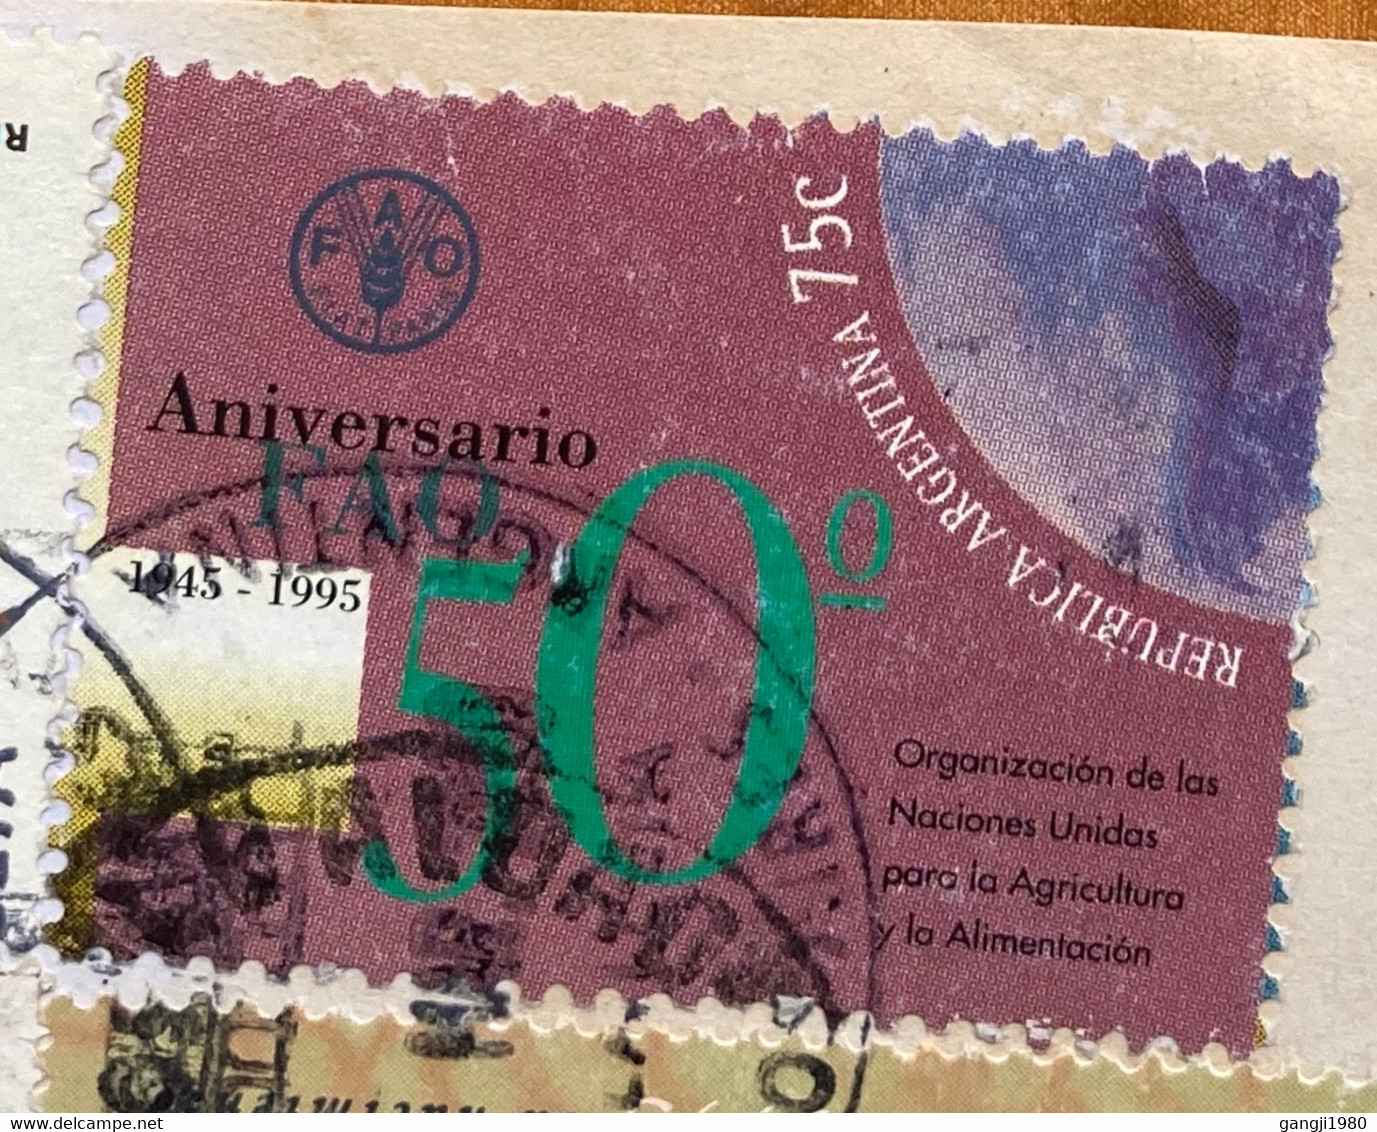 ARGENTINA 2000, JUAN PERON, OWL BIRD TAB, 3 STAMPS SPECIAL BUILDING CANCELLATION,AIRMAIL COVER TO INDIA, RECEIVED IN TOR - Lettres & Documents